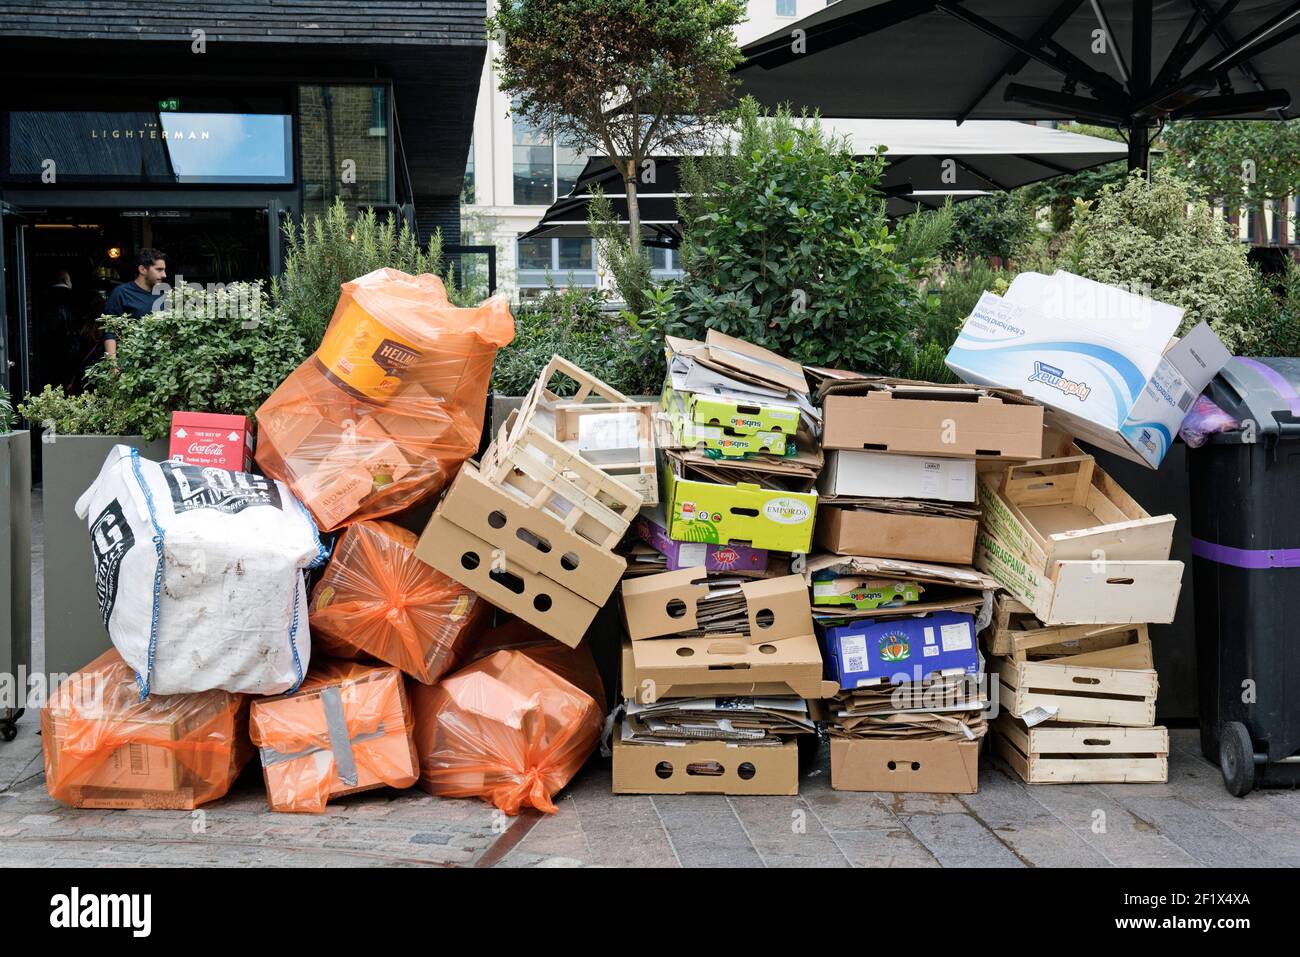 Pile of rubbish including cardboard and wooden fruit boxes piled up outside The Lighterman Restaurant Granary Square awaiting collection Kings Cross Stock Photo